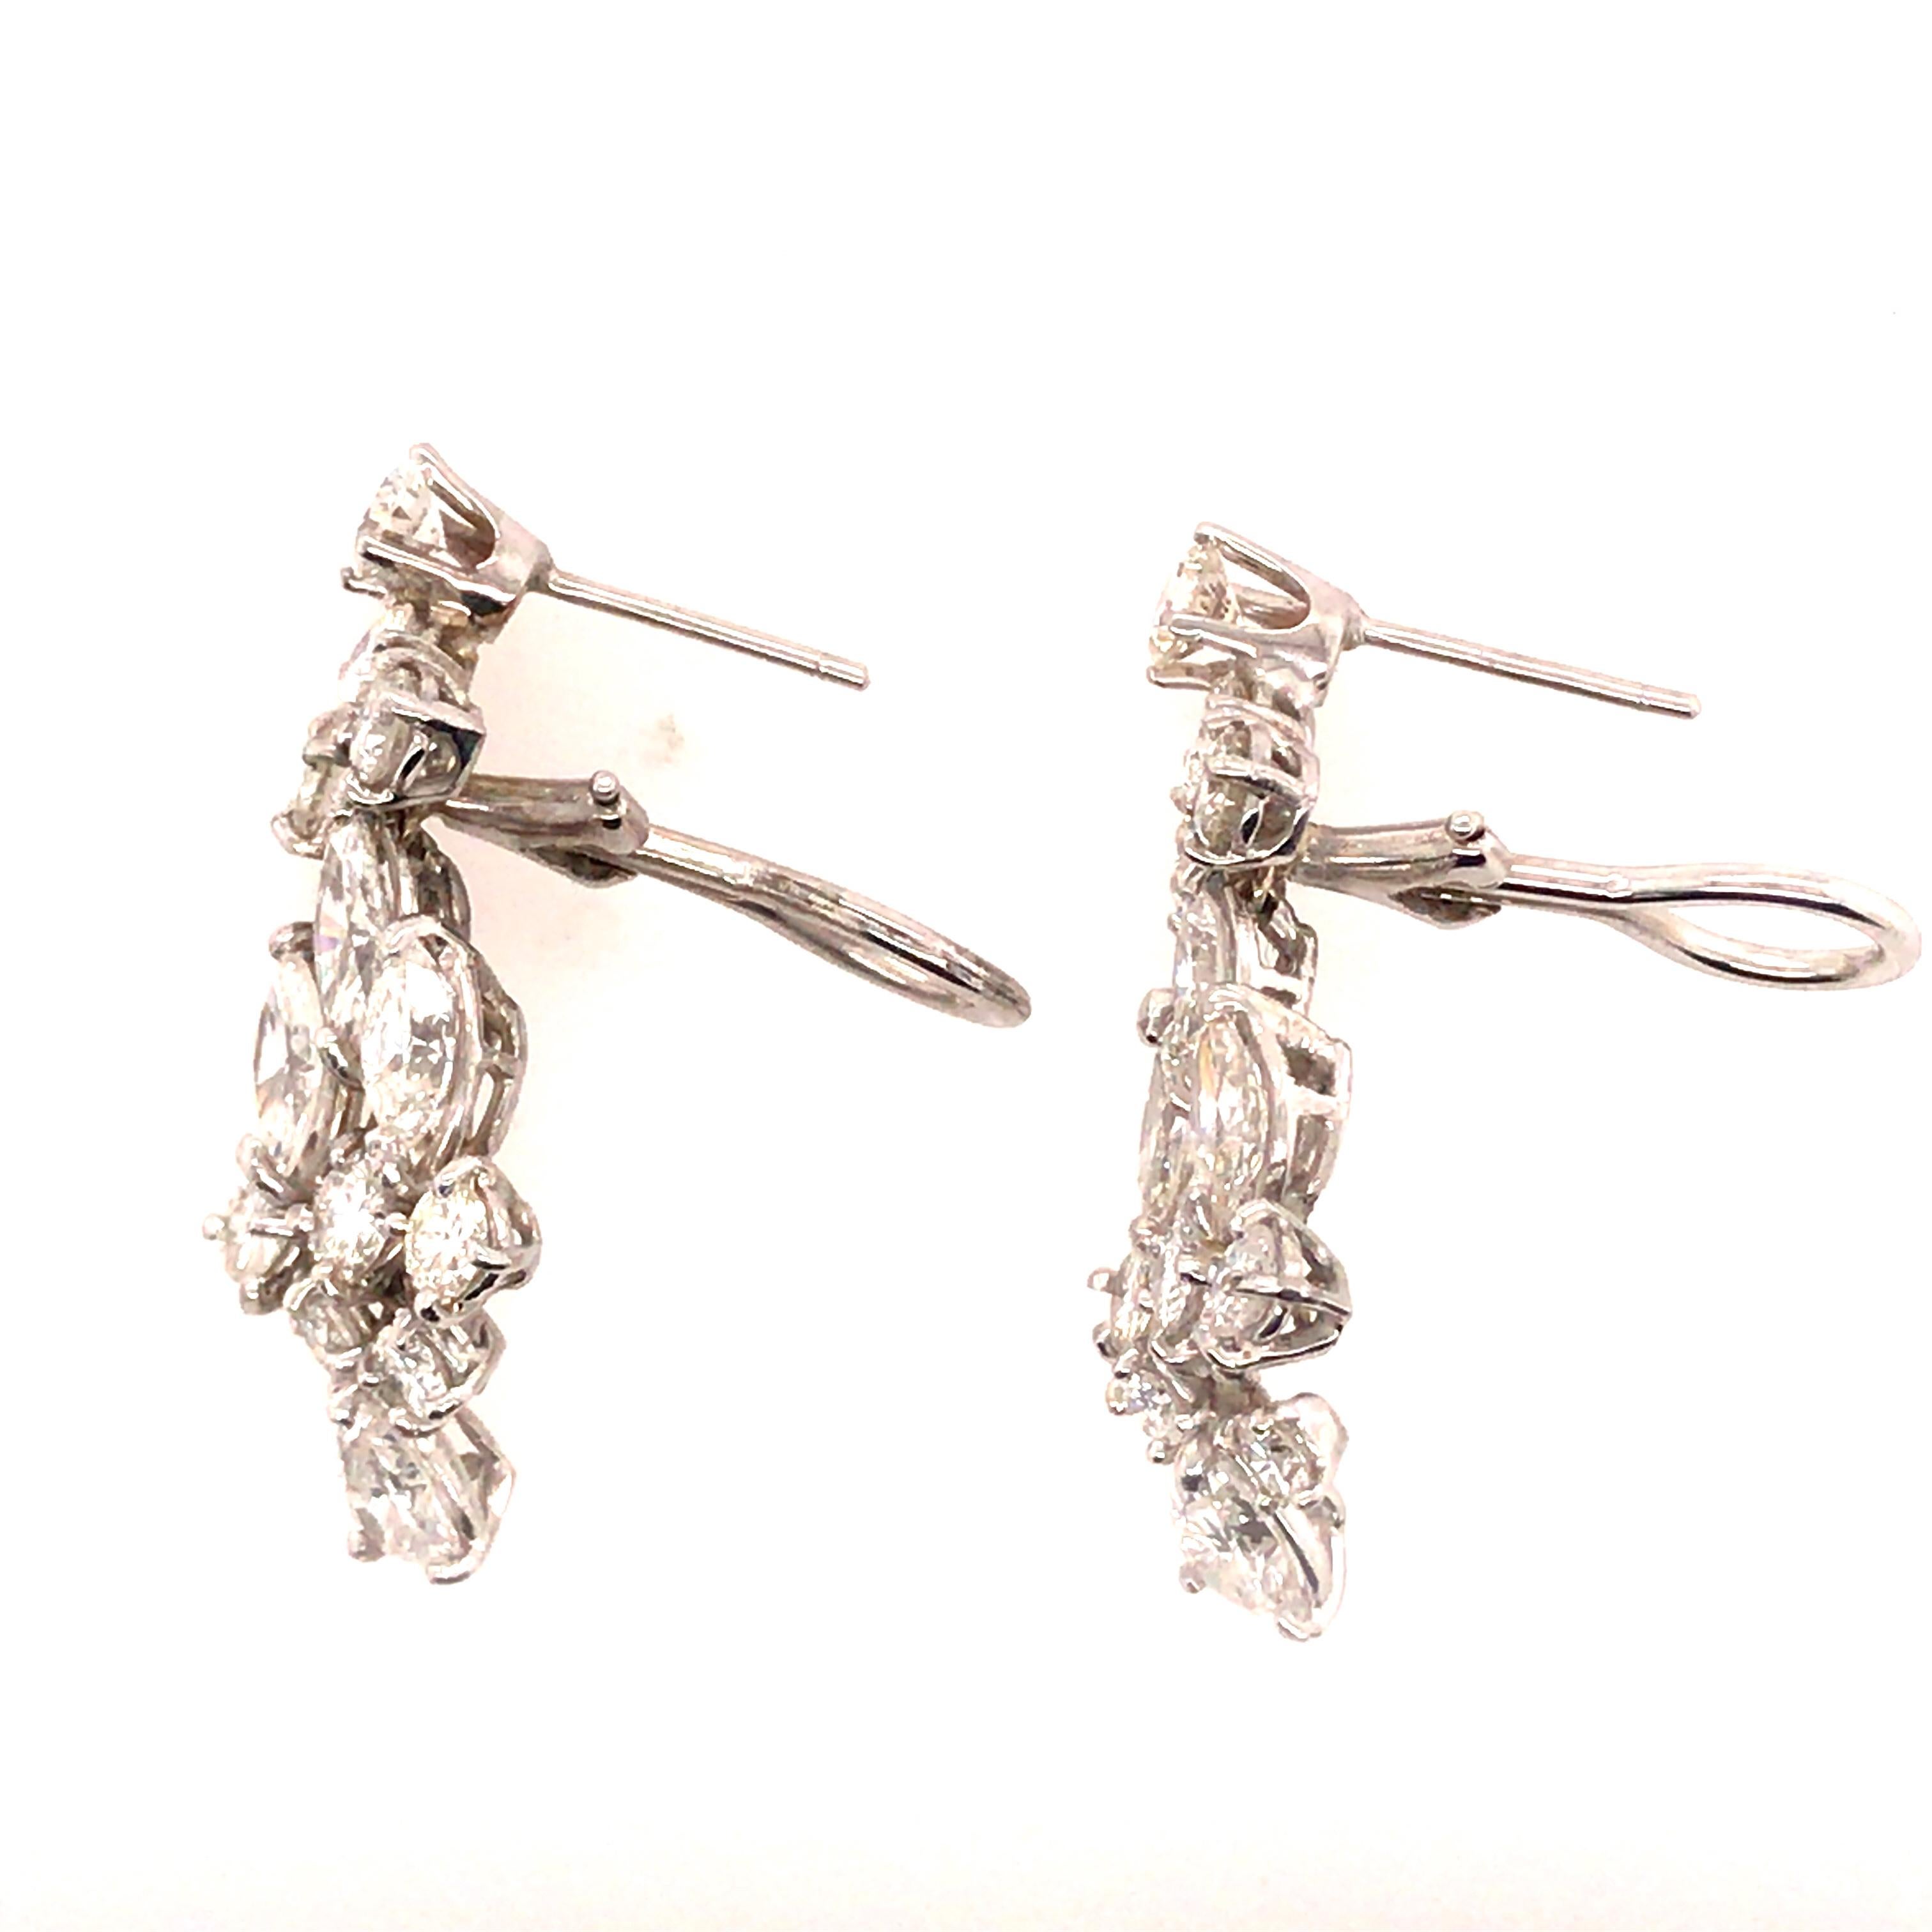 Multi-Shape Diamond Hanging Earrings in Platinum.  (18) Round Brilliant Cut, (6) Marquise and (2) Pear Shape Diamonds 6.20 carat total weigh, G-H in color and VS in quality are expertly set.  The earrings measure 1 1/4 inch in length and 1/2 inch in